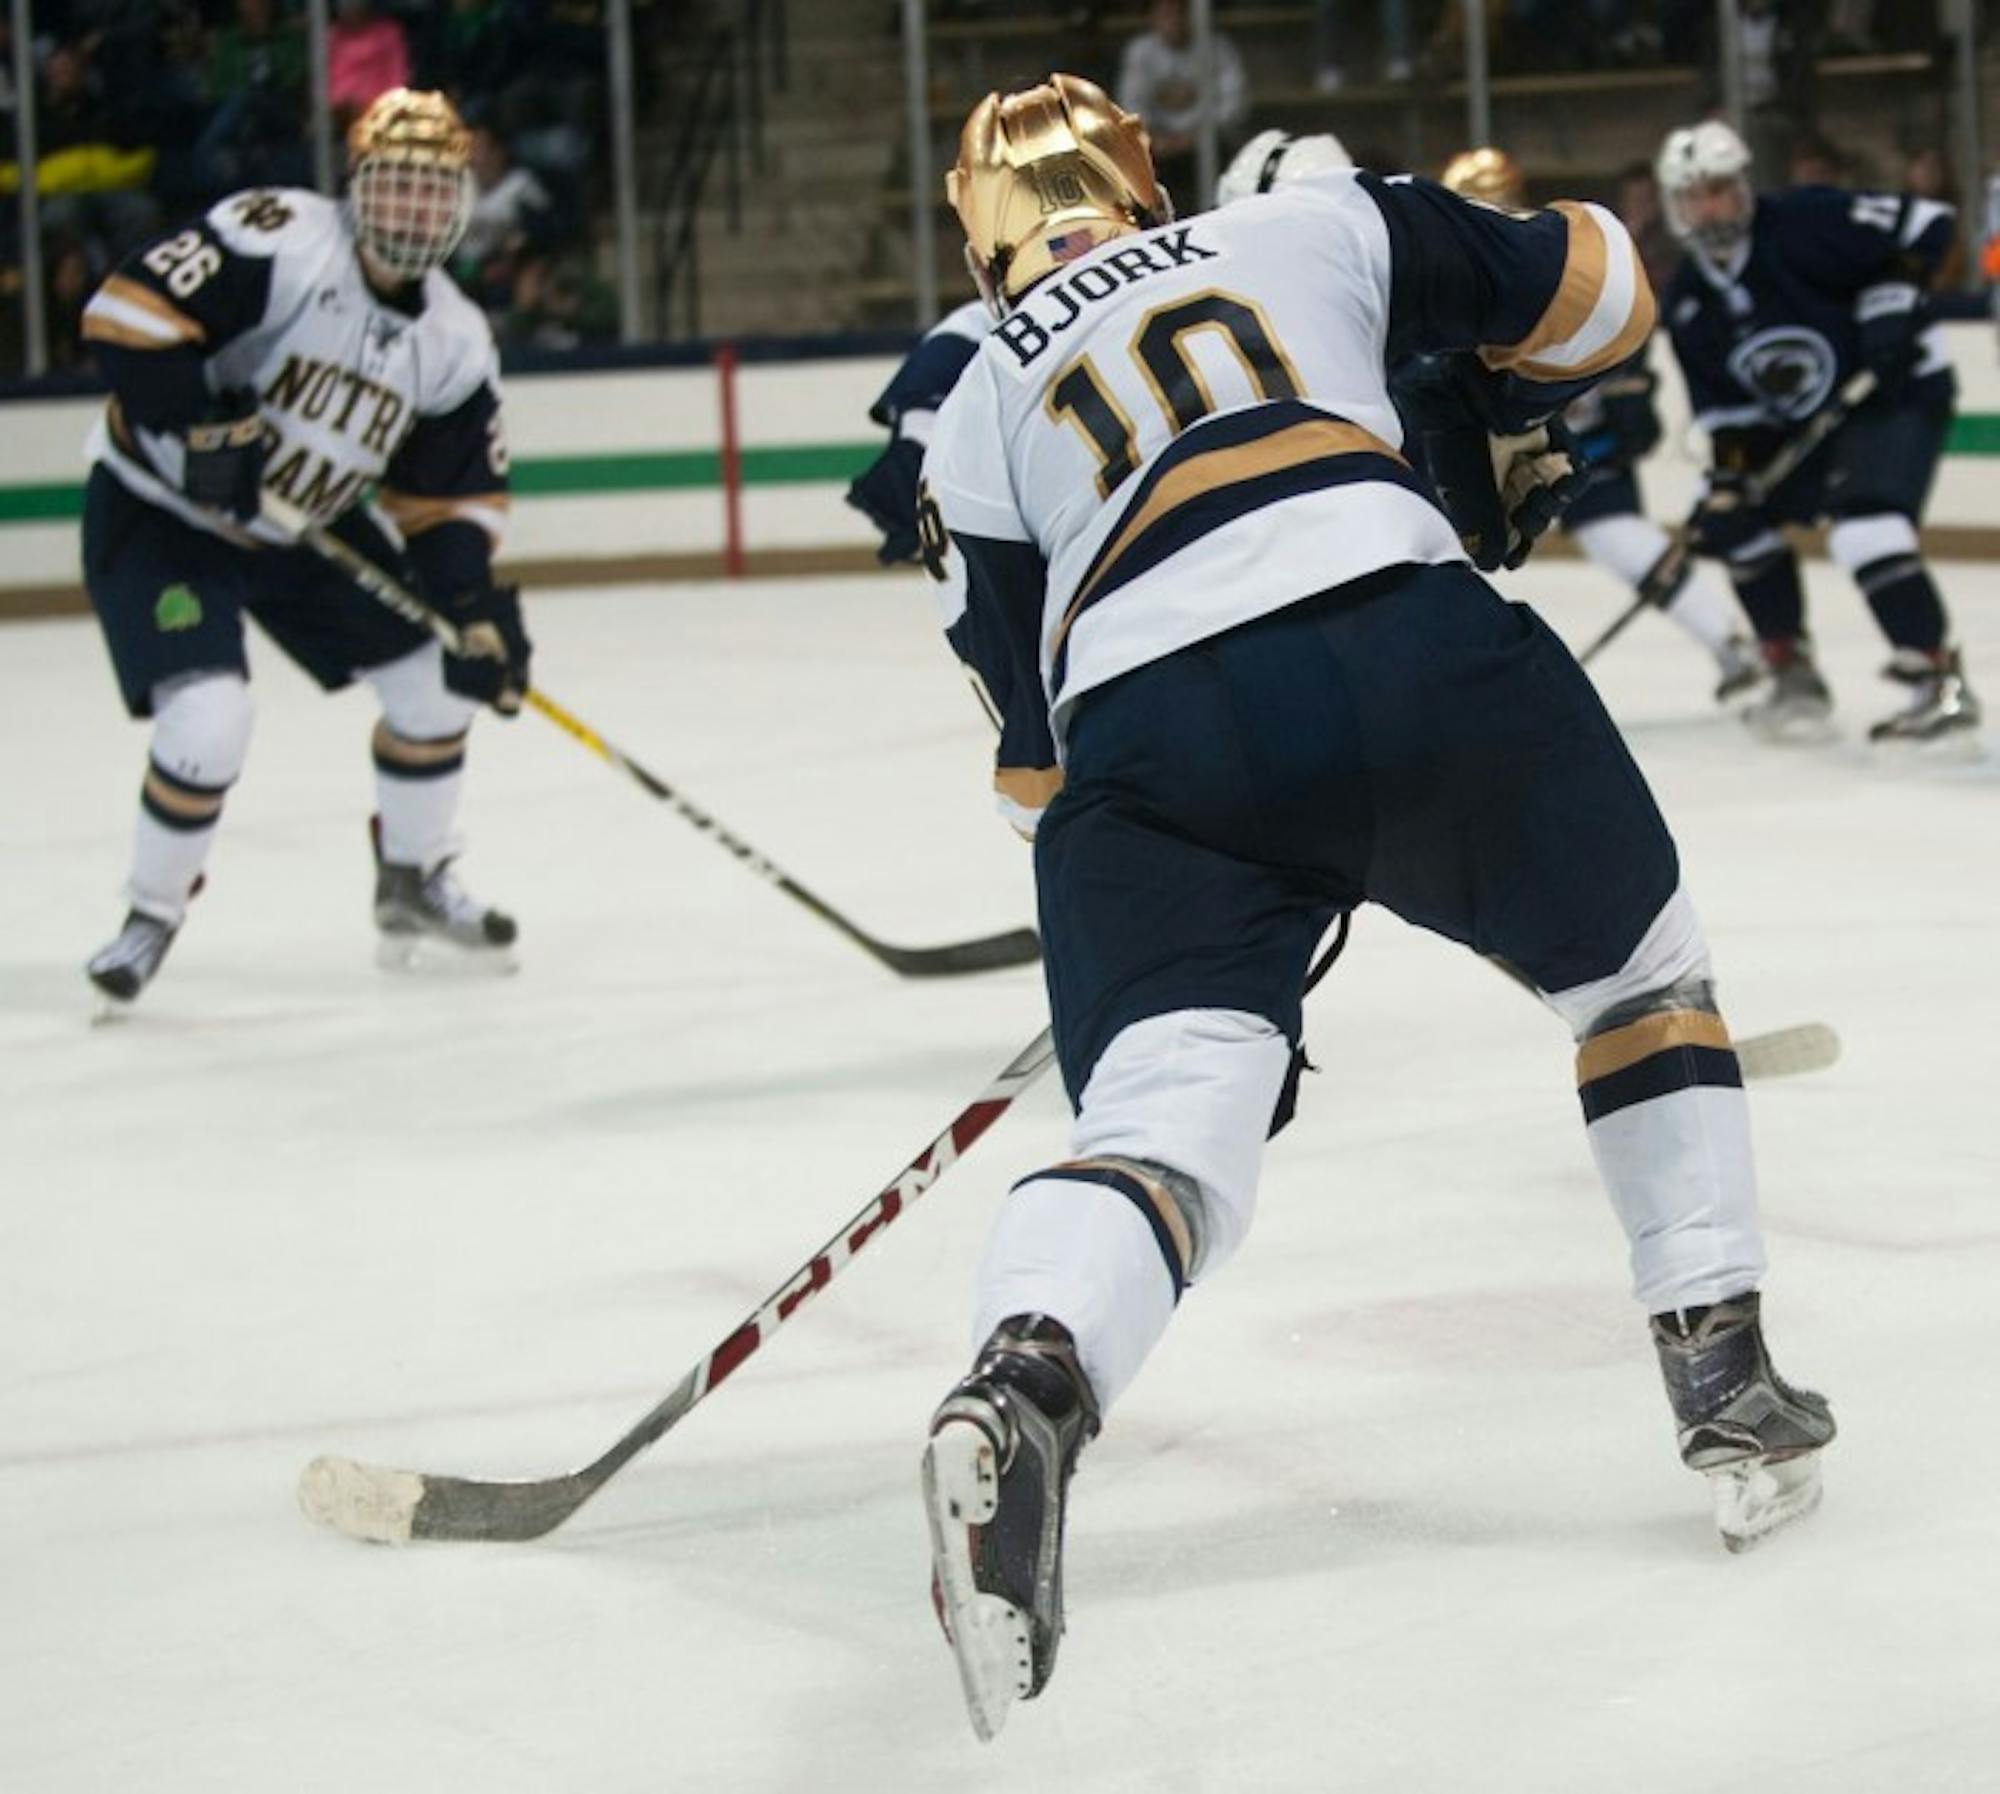 Irish junior forward Anders Bjork gets set to shoot in Notre Dame's 3-2 overtime loss to Penn State on Saturday at Compton Family Ice Arena.